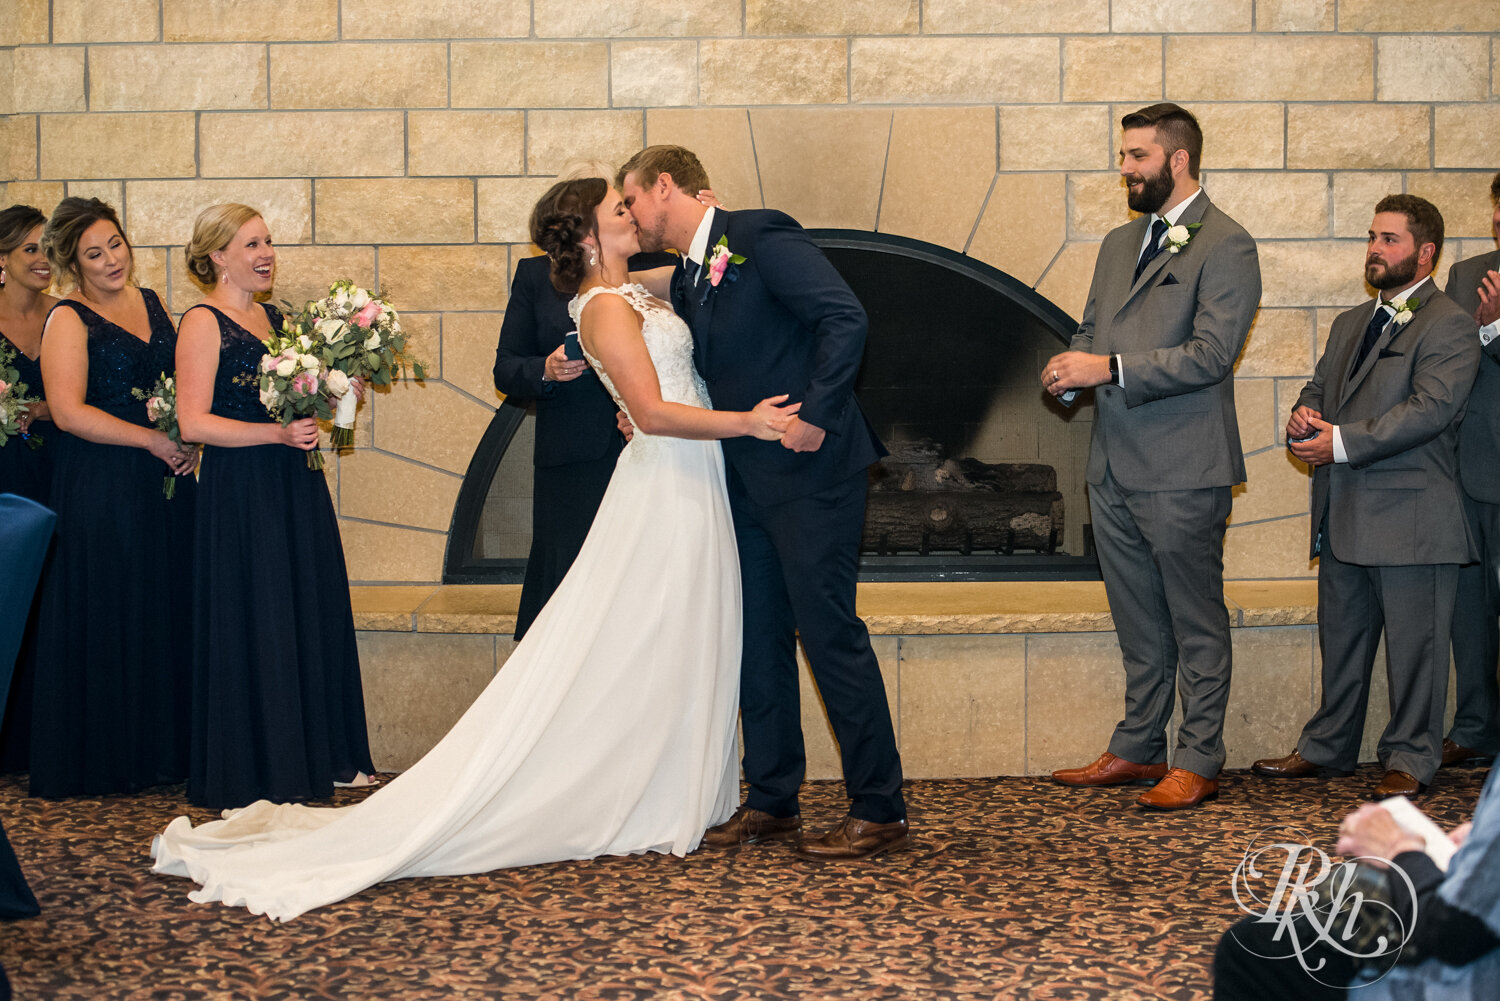 Bride and groom kiss during indoor wedding ceremony at Crown Room in Rogers, Minnesota.